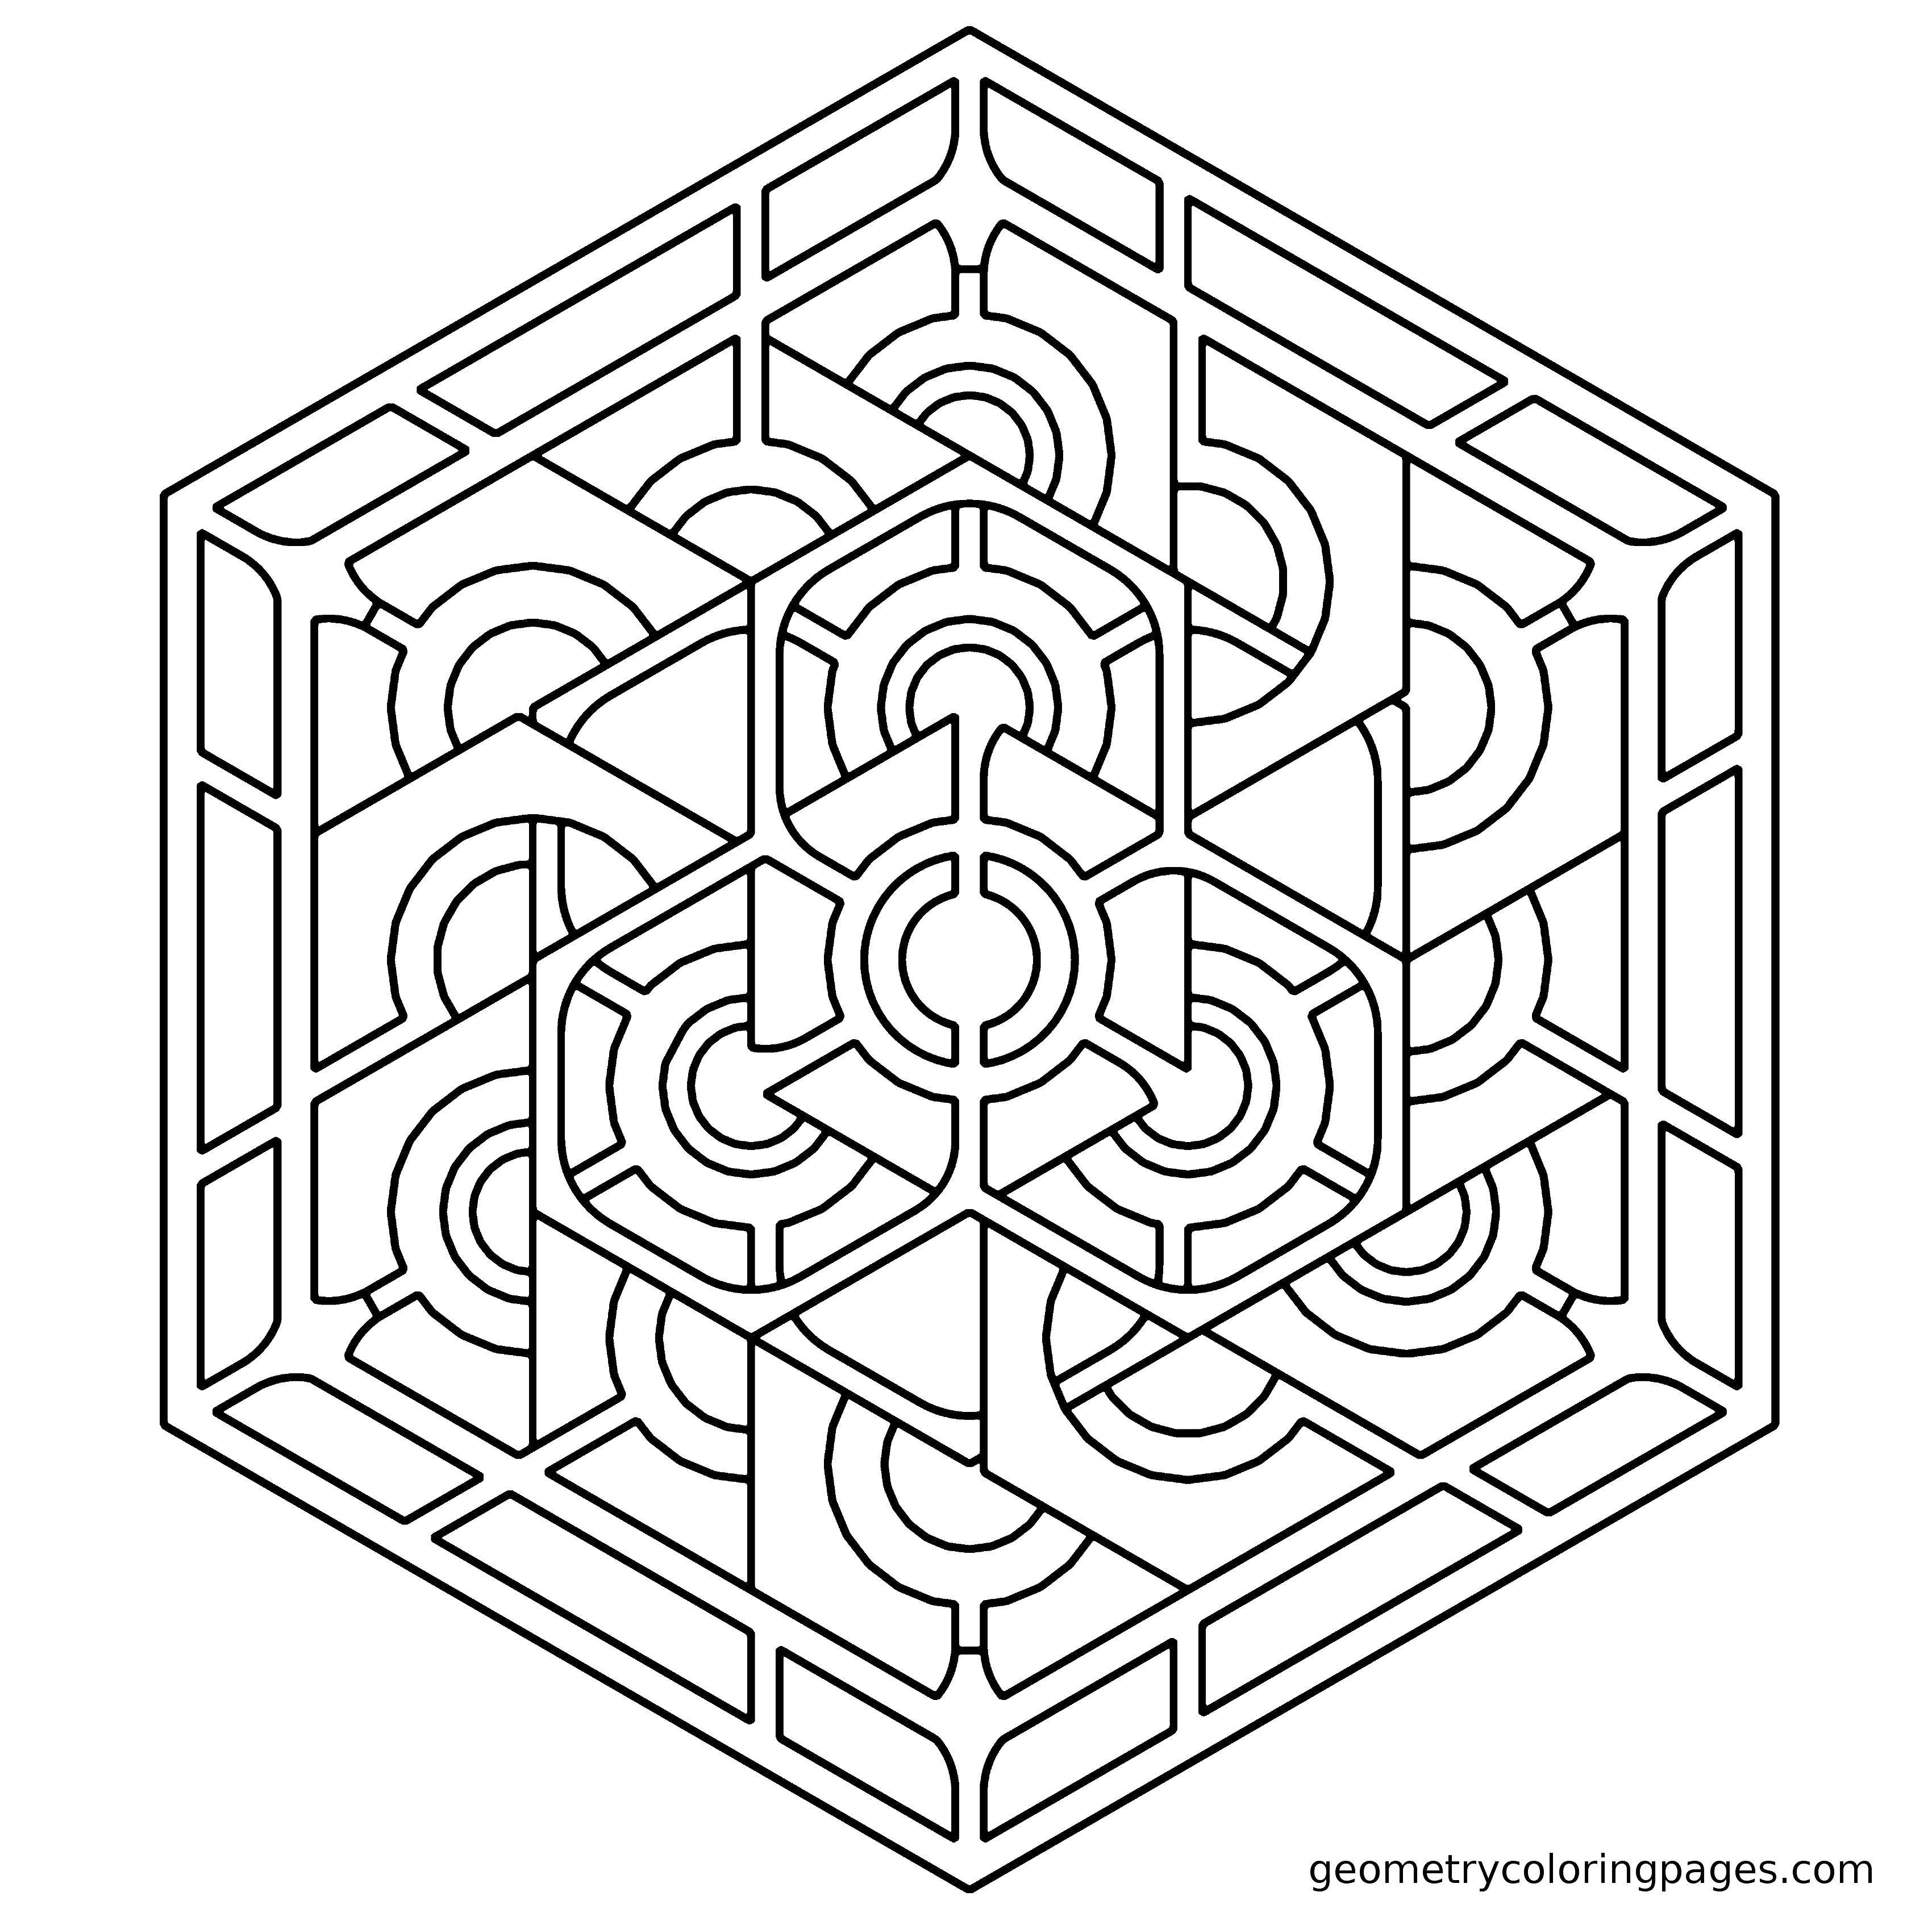 Coloring The pattern in the hexagon. Category With geometric shapes. Tags:  Patterns, geometric.